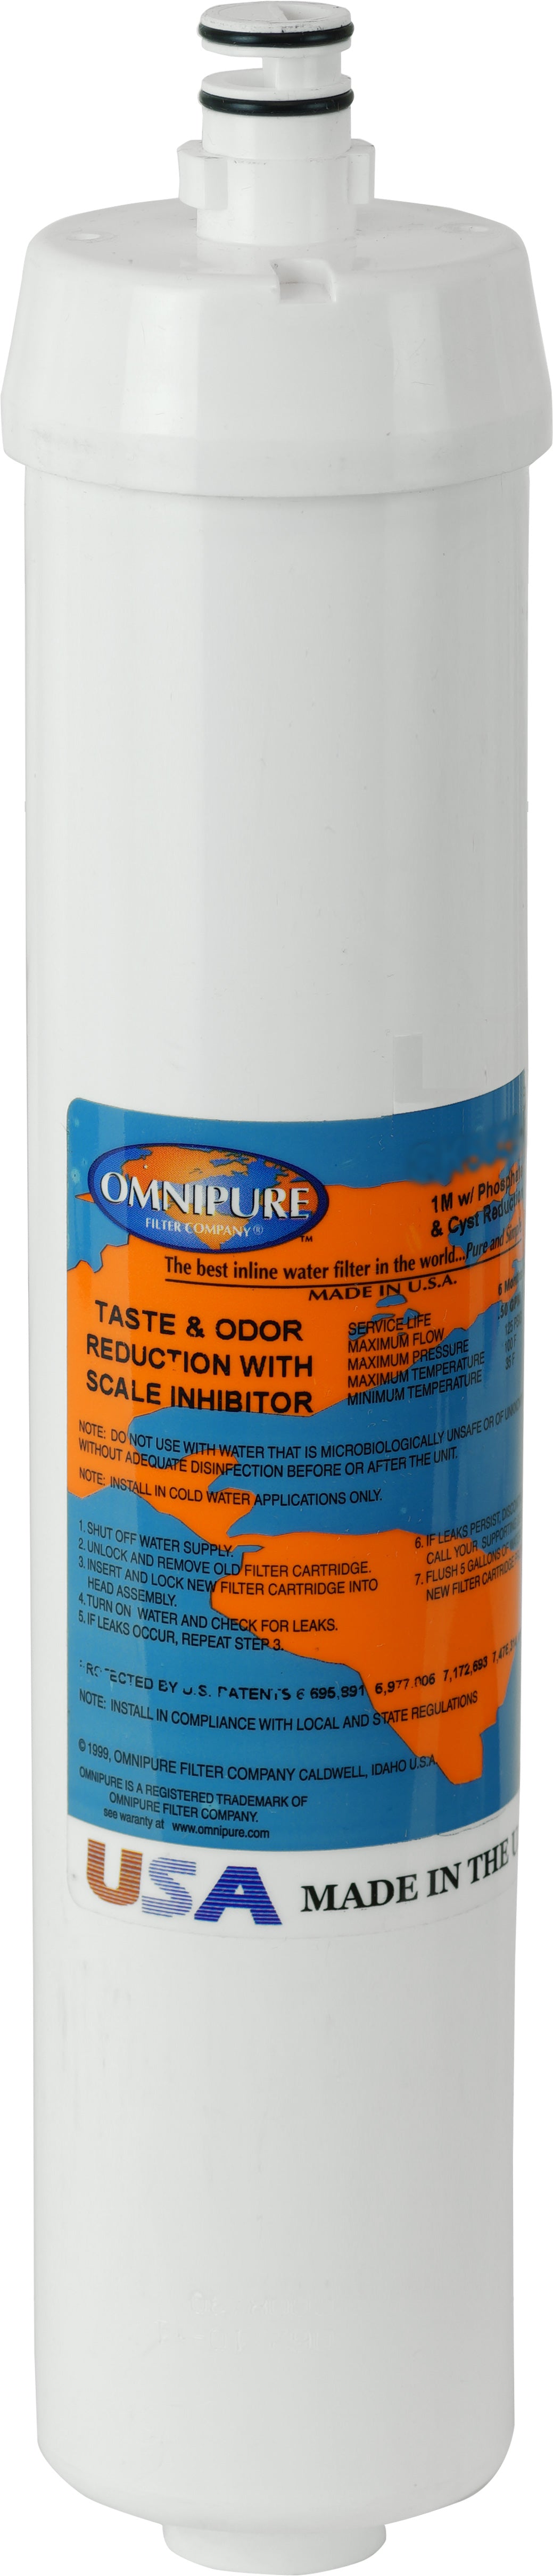 OMNIPURE GAC & SCALE INHIBITOR COMPATIBLE FILTERS CK-SERIES 2.5 Inch x 14" (CUNO AQUAPURE COMPATIBLE)